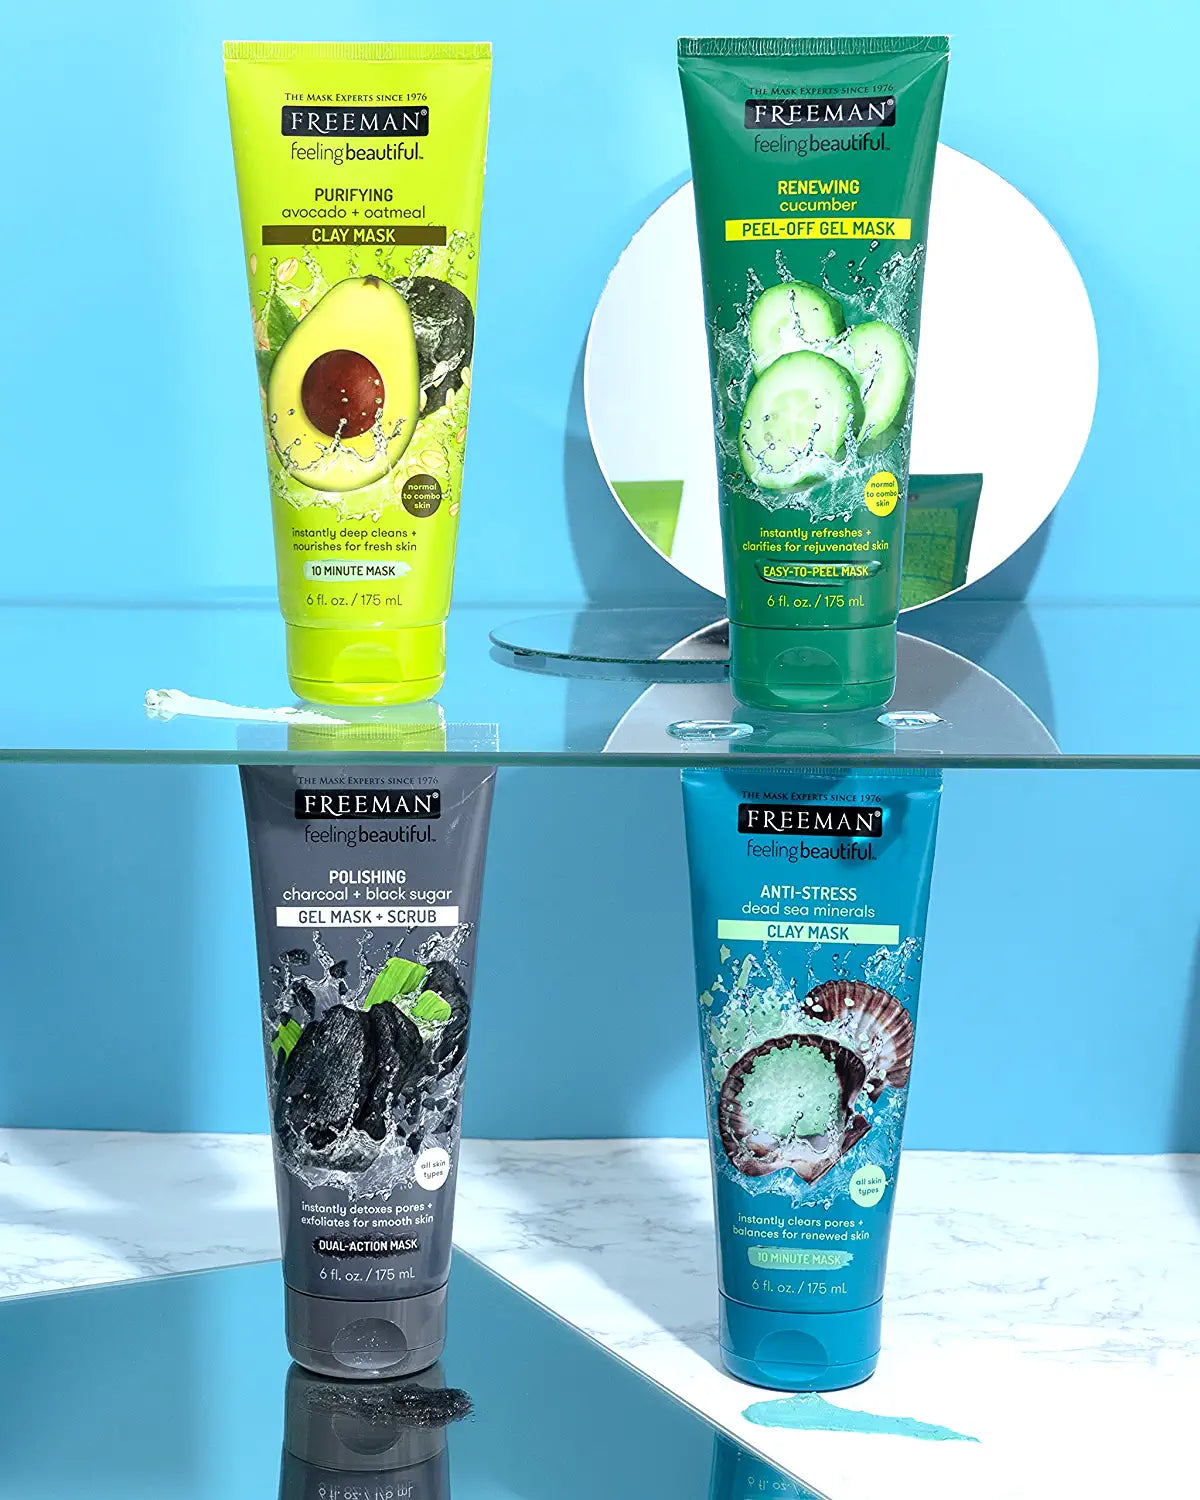 Freeman Facial Mask Variety Pack: Oil Absorbing Clay